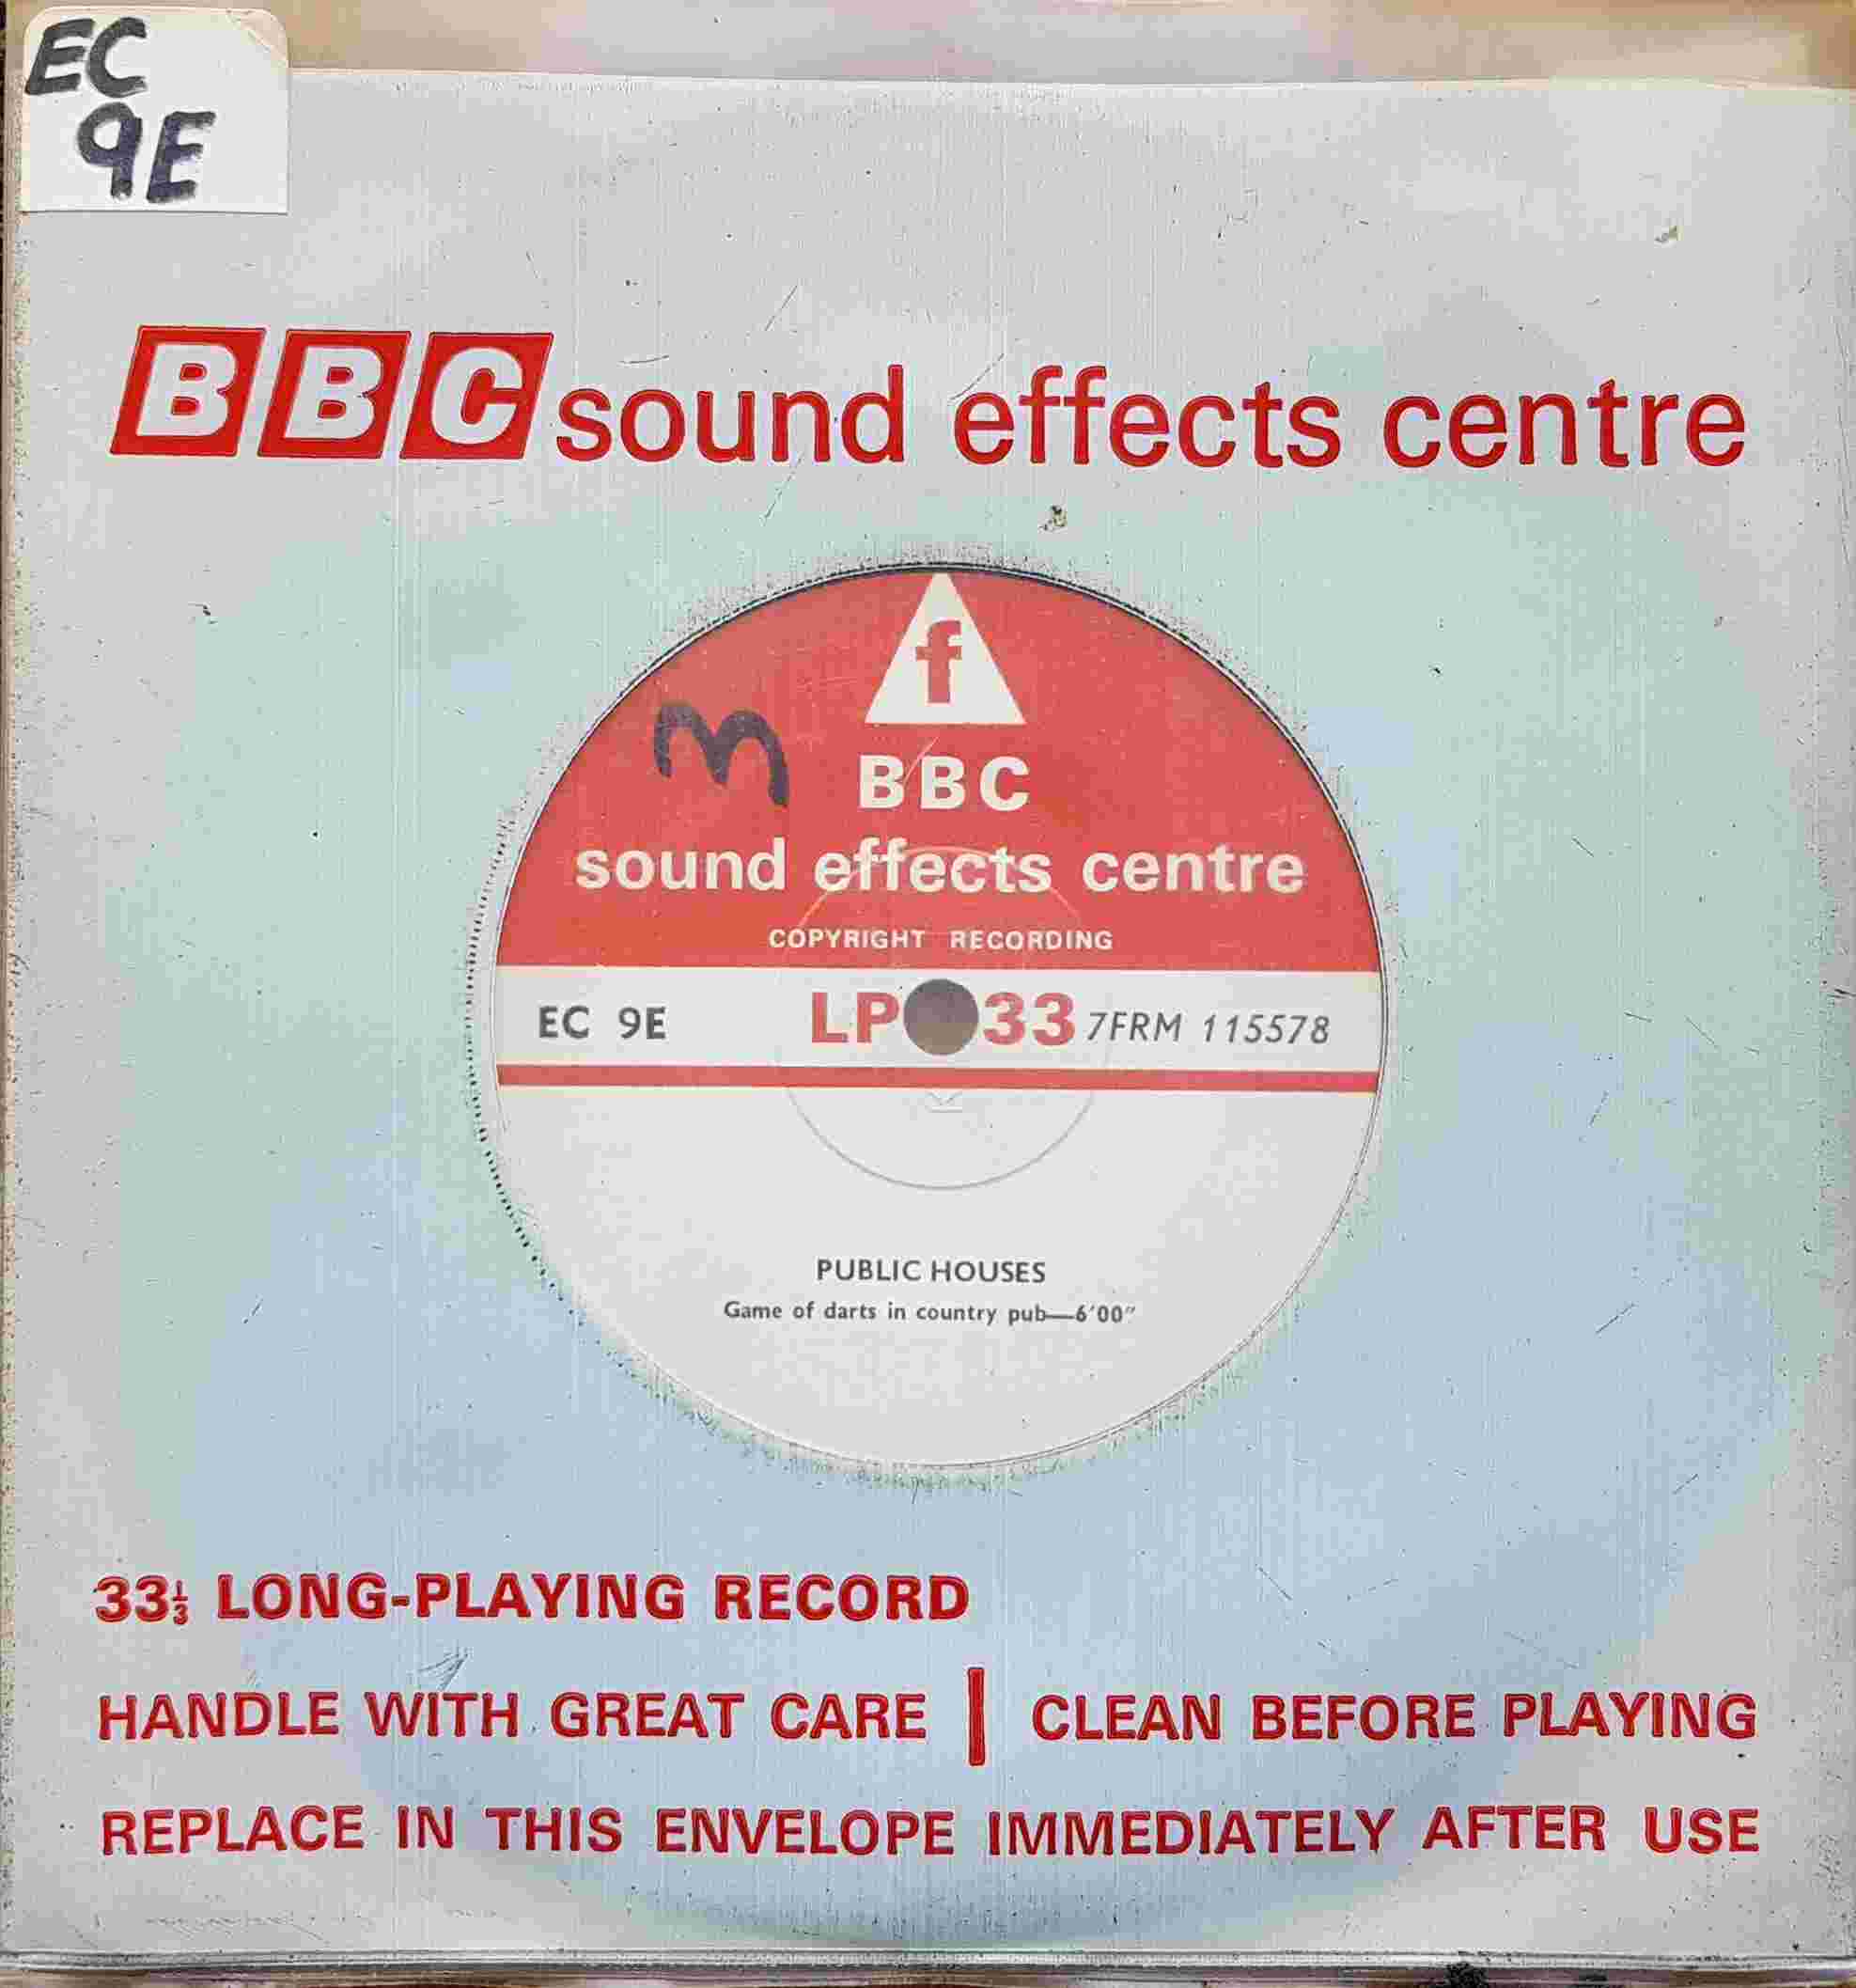 Picture of EC 9E Public houses by artist Not registered from the BBC singles - Records and Tapes library